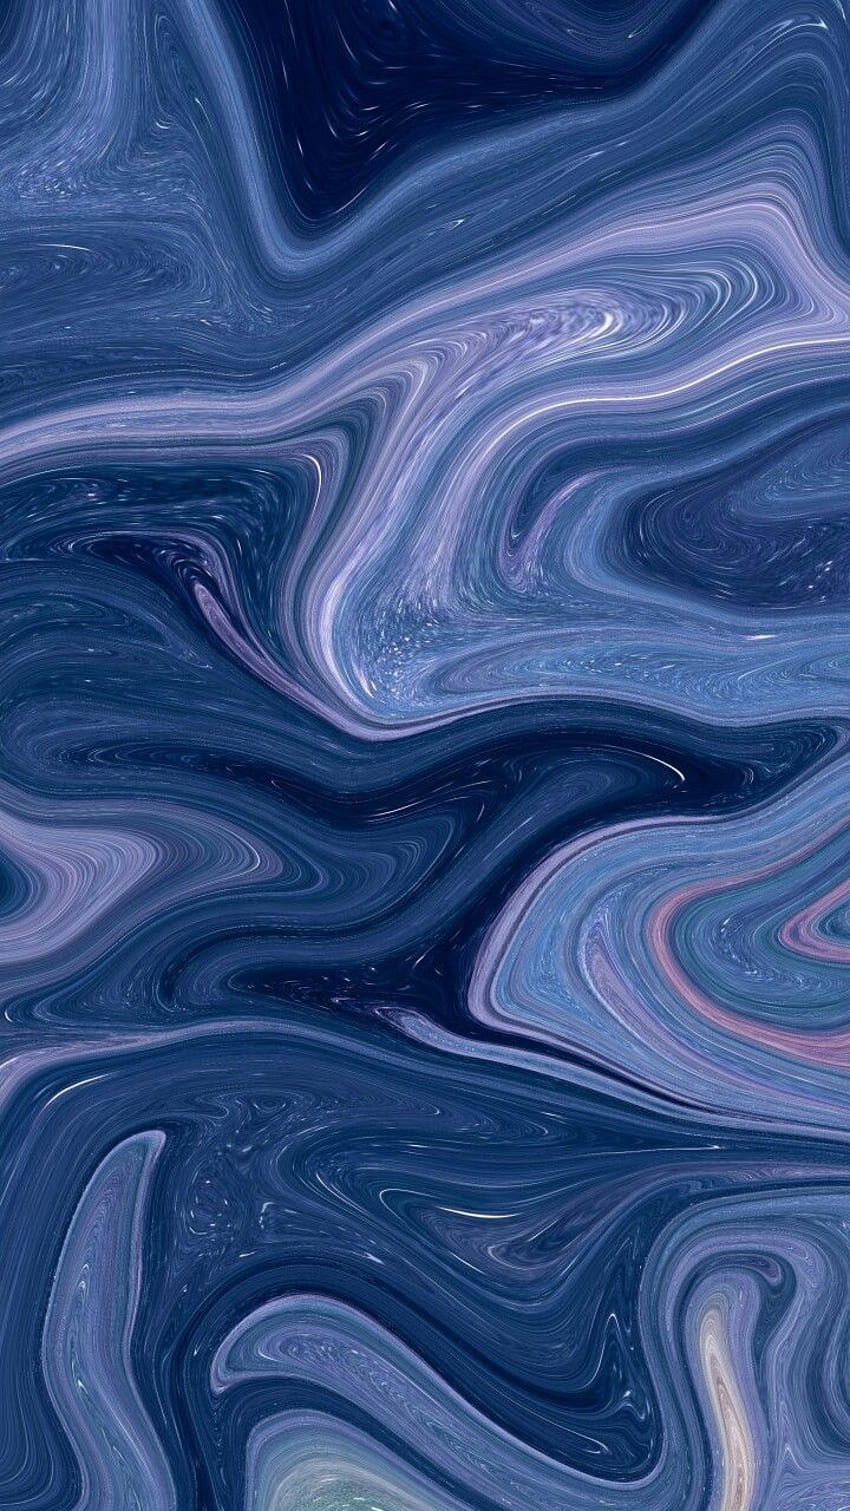 A blue and purple marble pattern - Modern